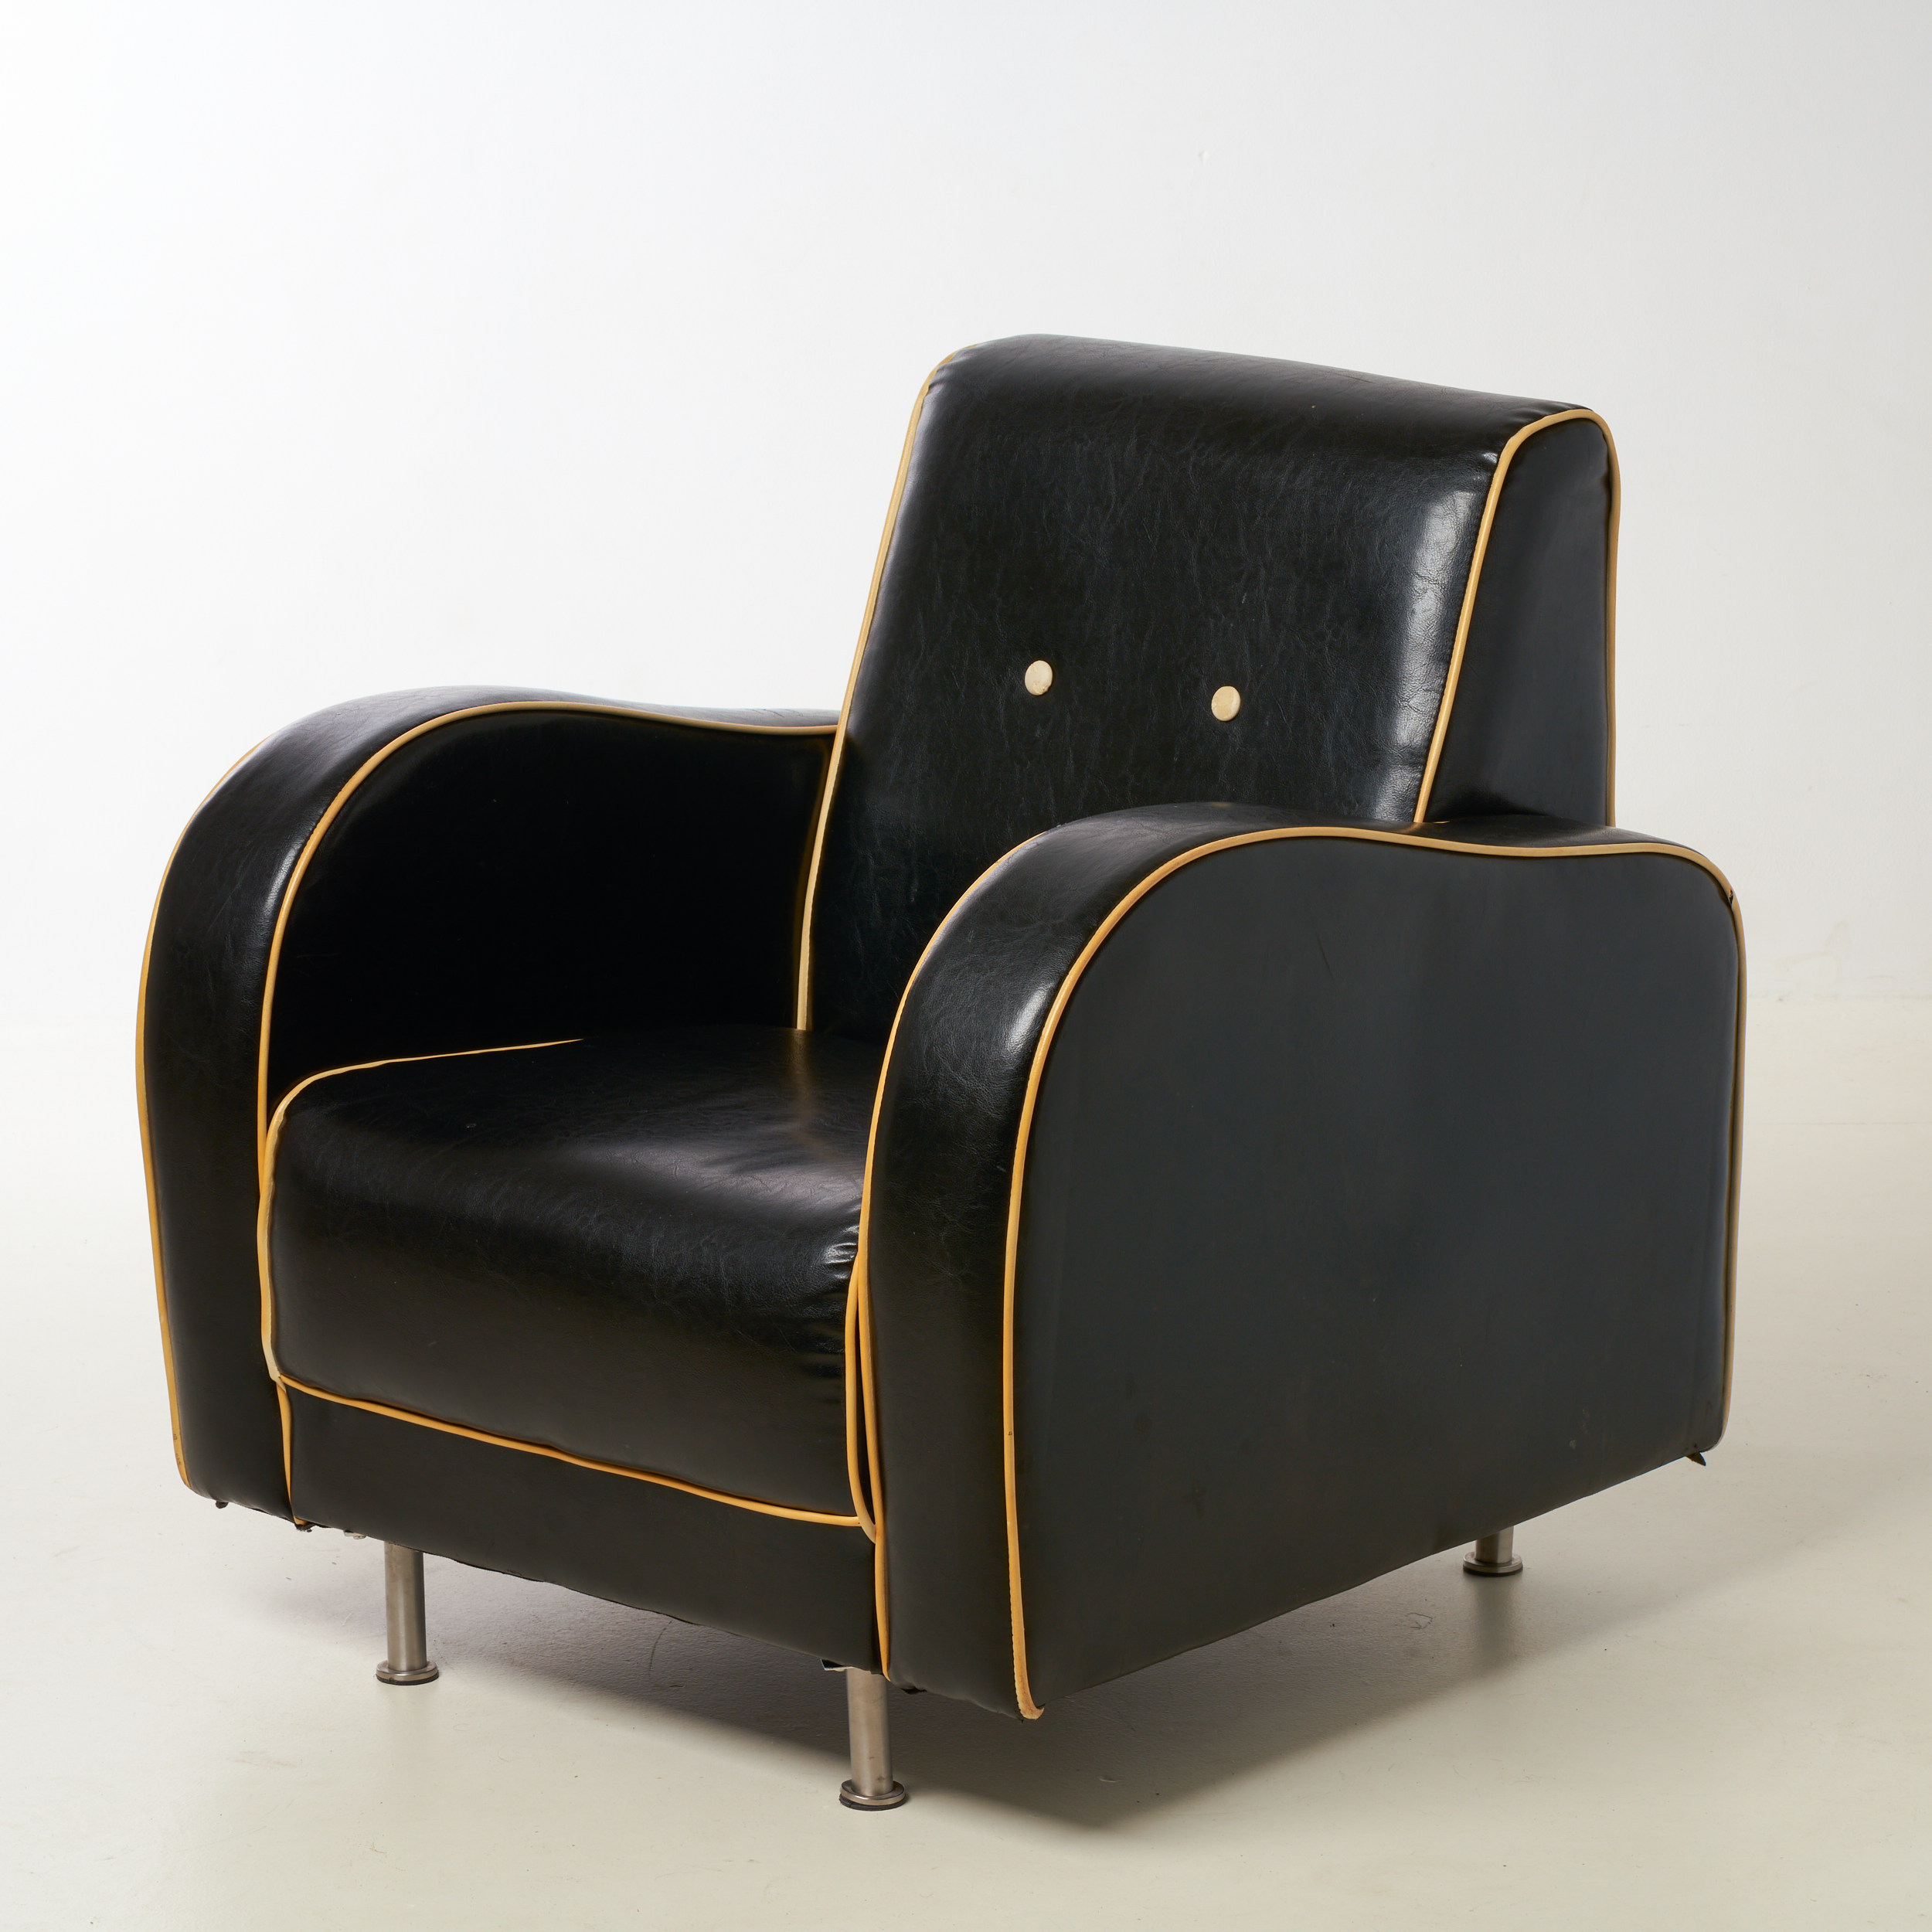 VINTAGE AND VERY DECORATIVE ARMCHAIR IN BLACK LEATHER, 1950 - 1960s